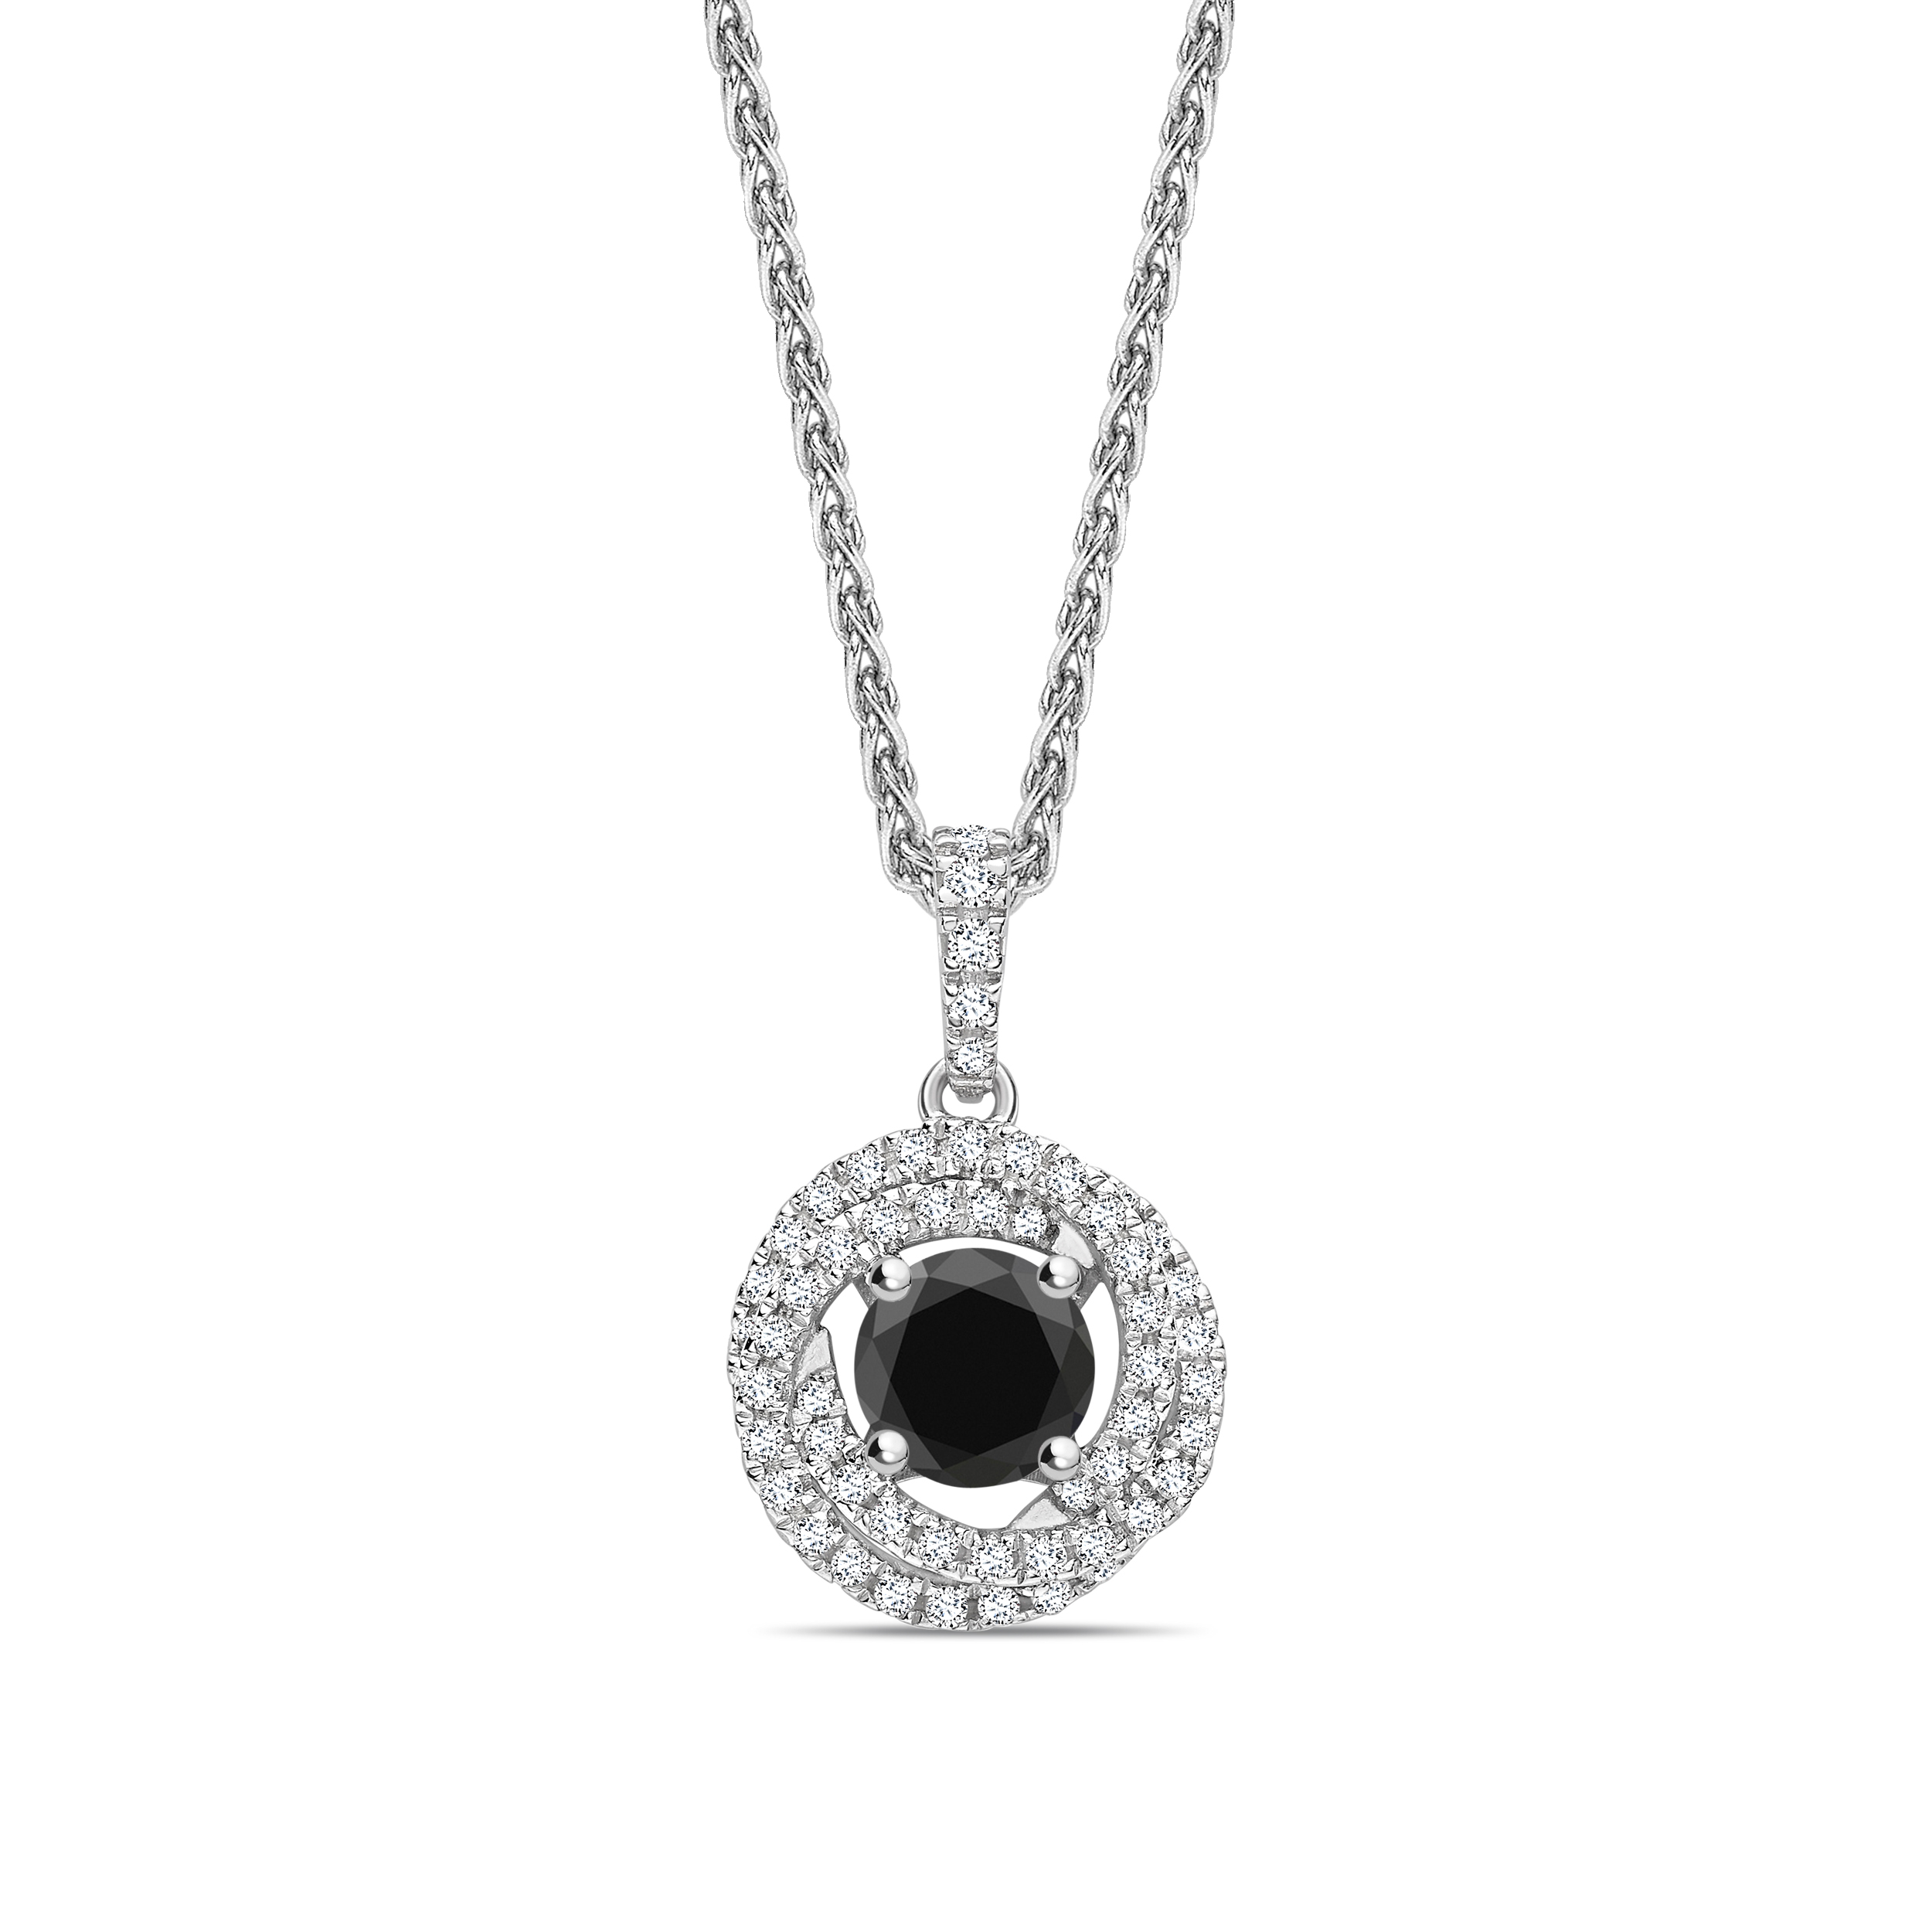 Swirling & Halo Style Black Diamond Solitaire Necklace Pendants